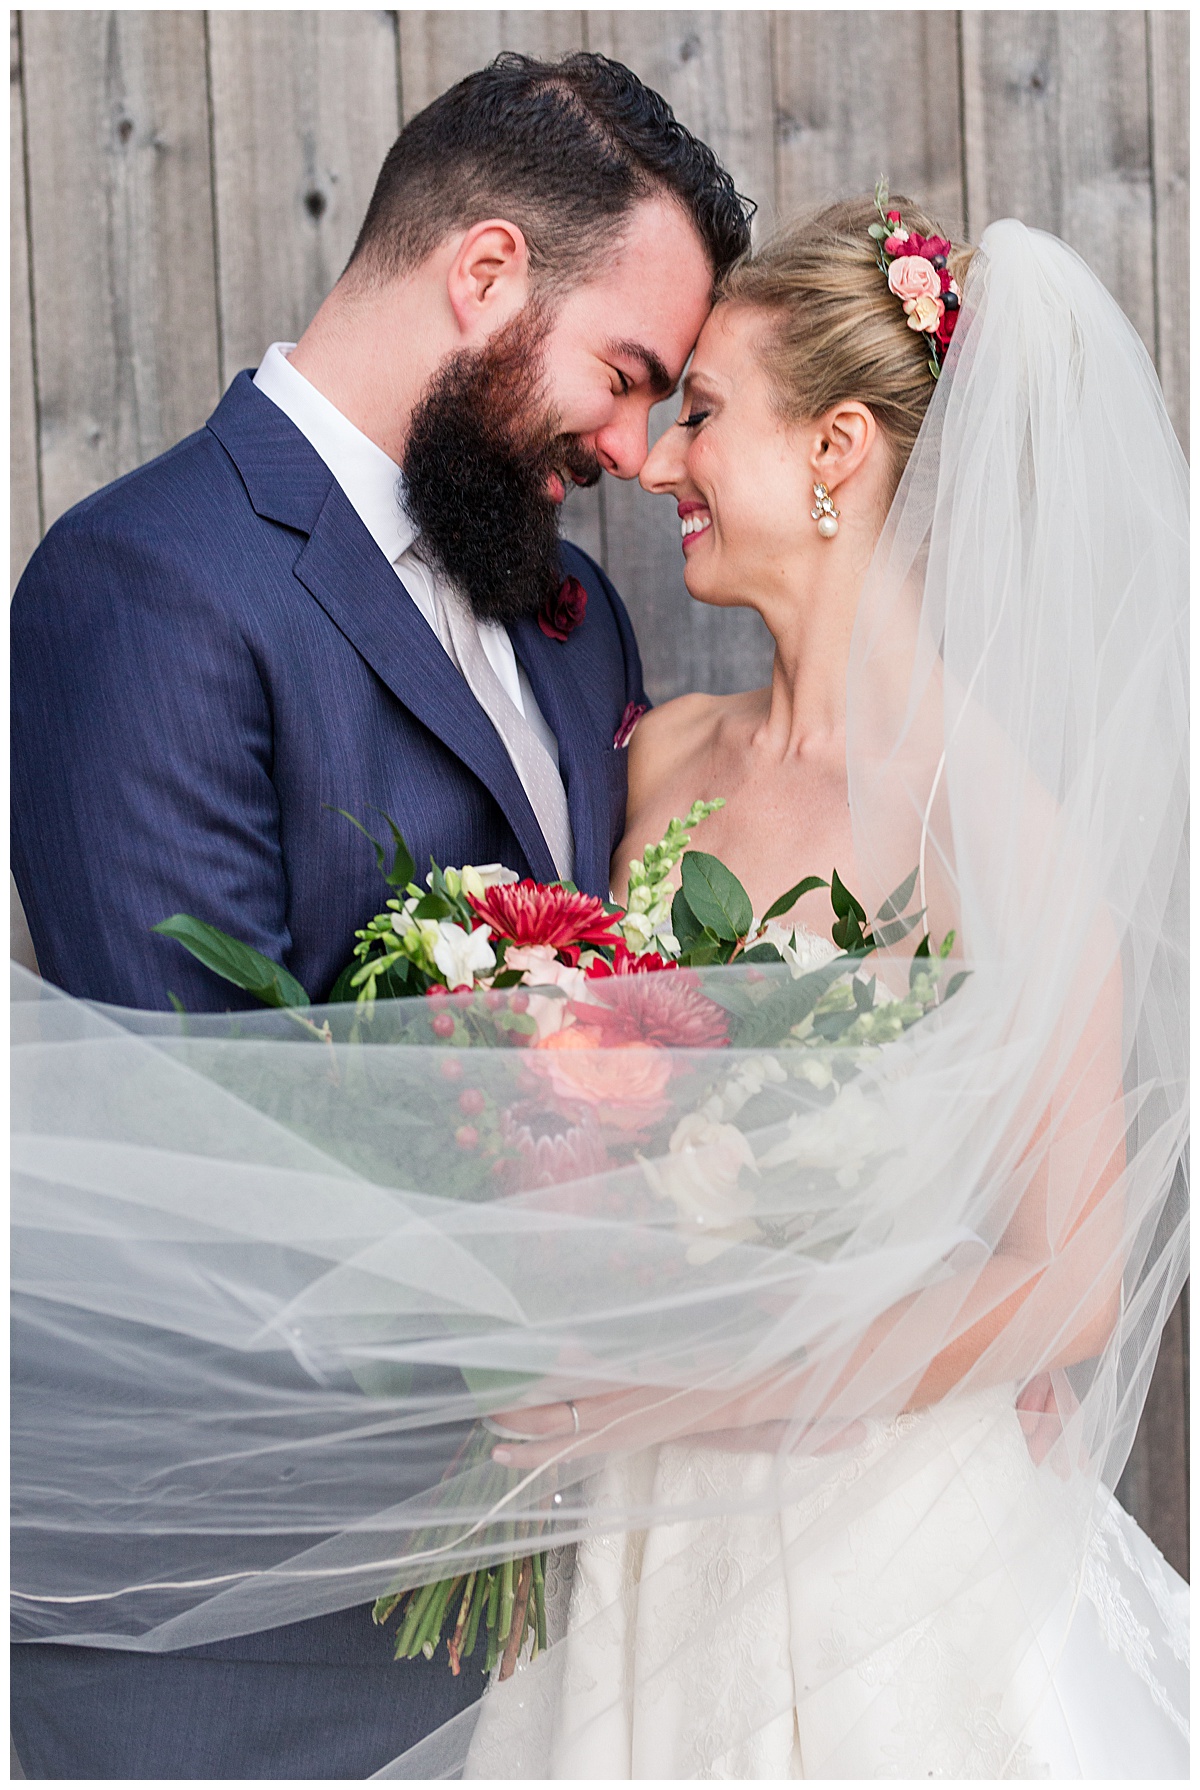 Bride and Groom embrace one another, forehead-to-forehead, with veil draped in front of them